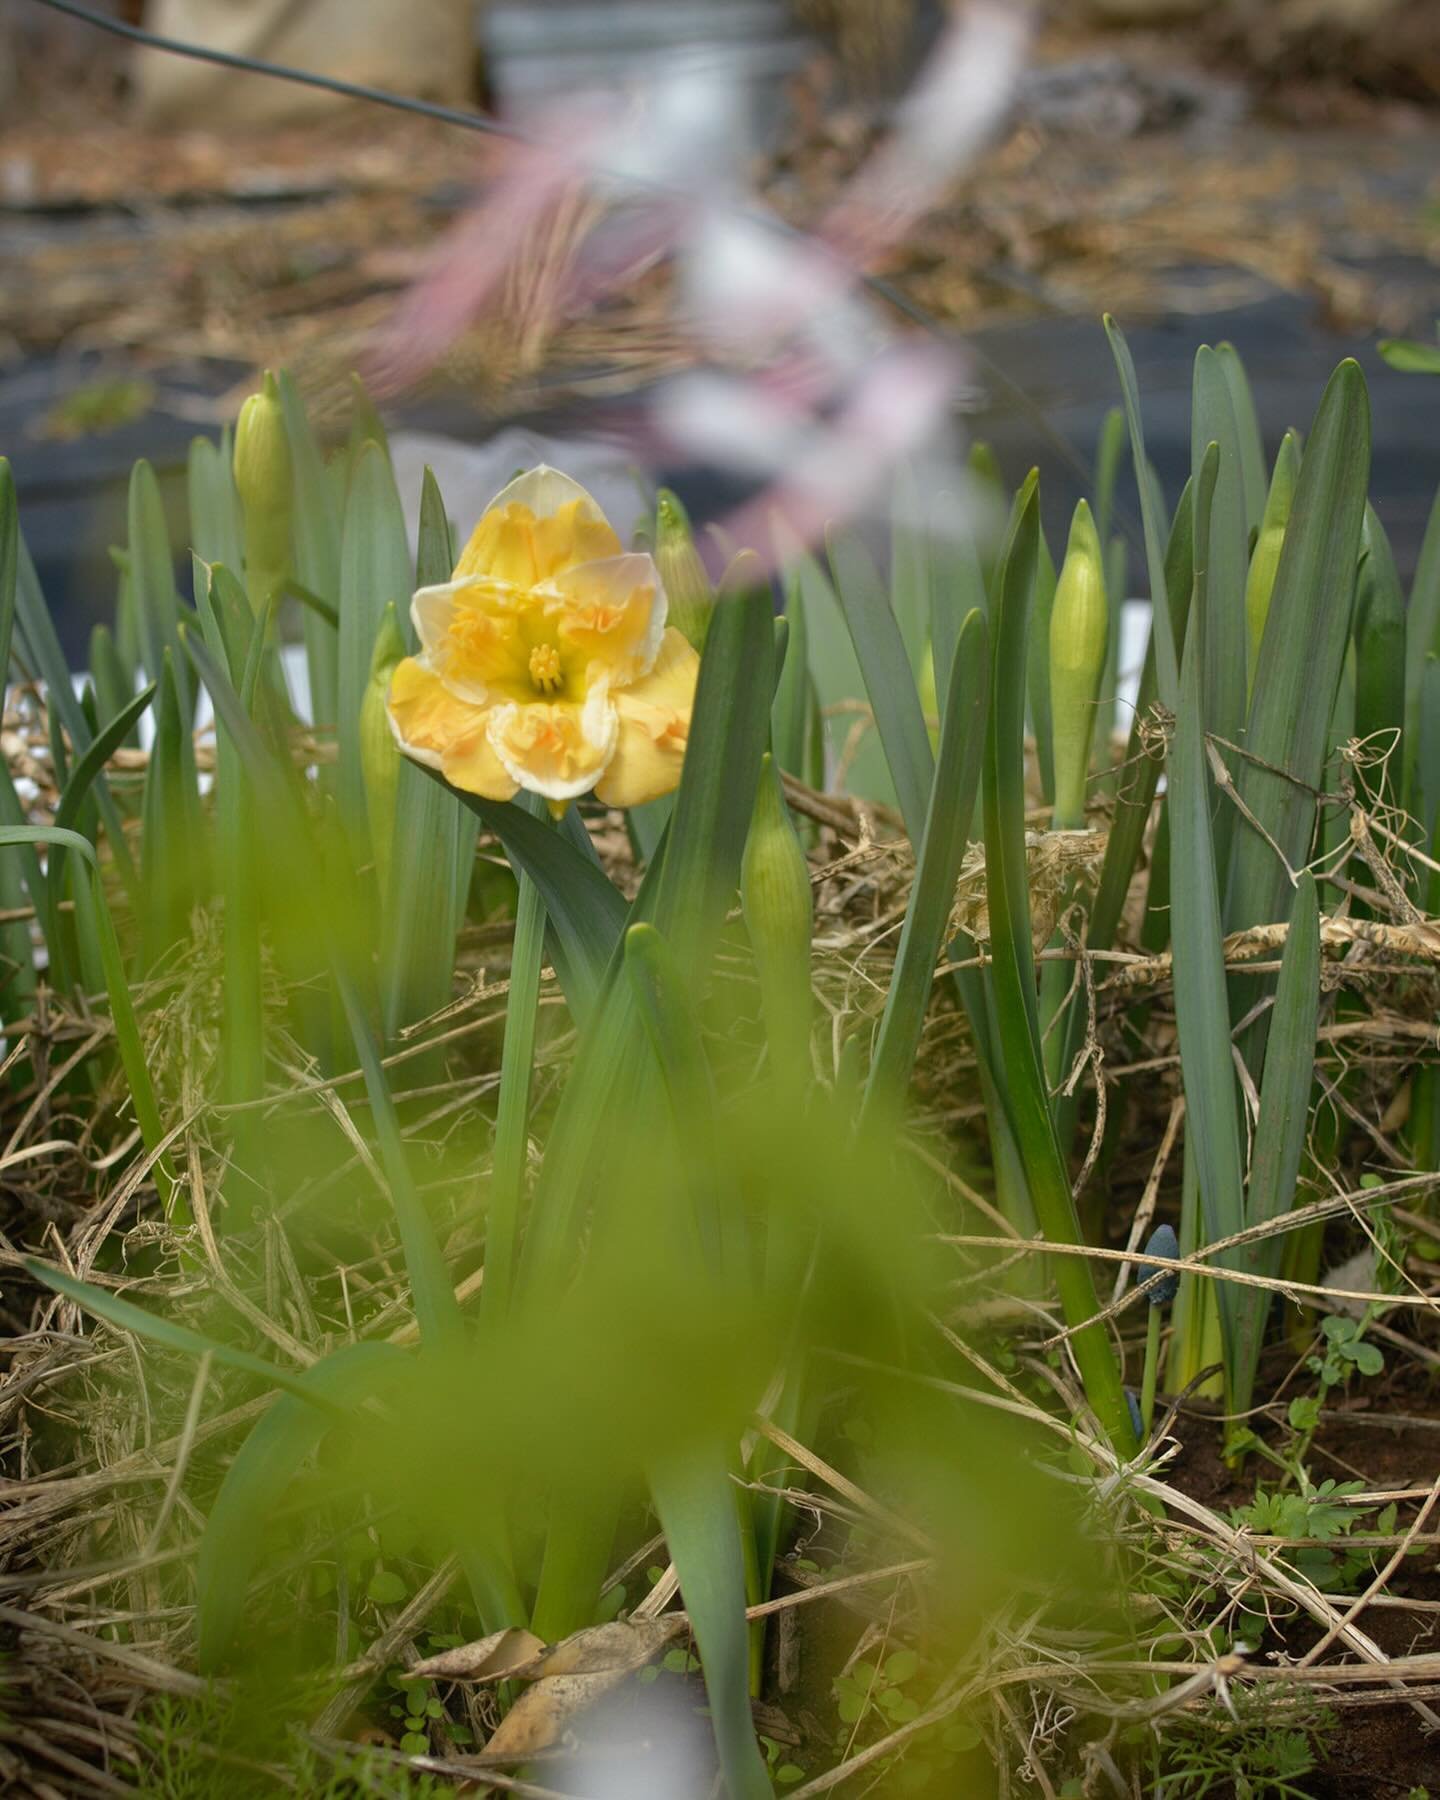 Hello spring ☺️ These little faces are popping up and we&rsquo;re so happy to see them&hellip; 

#farmerflorist #daffodil #springblooms #alltheprettyflorals #mybloominglens #mngrown #springflowers #duluthmn